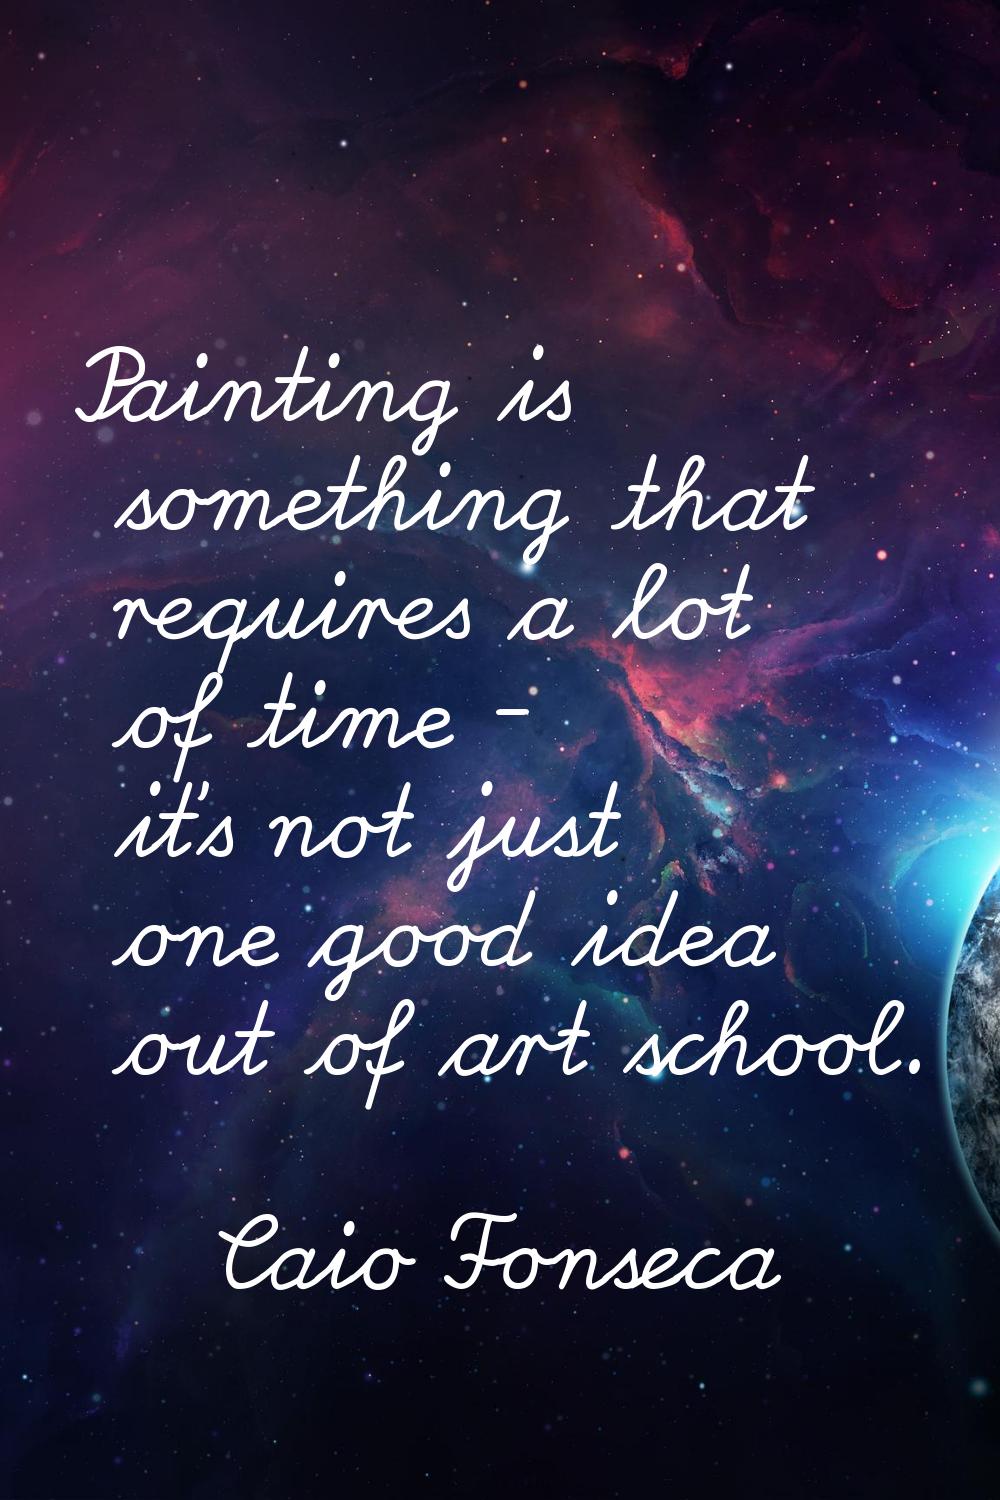 Painting is something that requires a lot of time - it's not just one good idea out of art school.